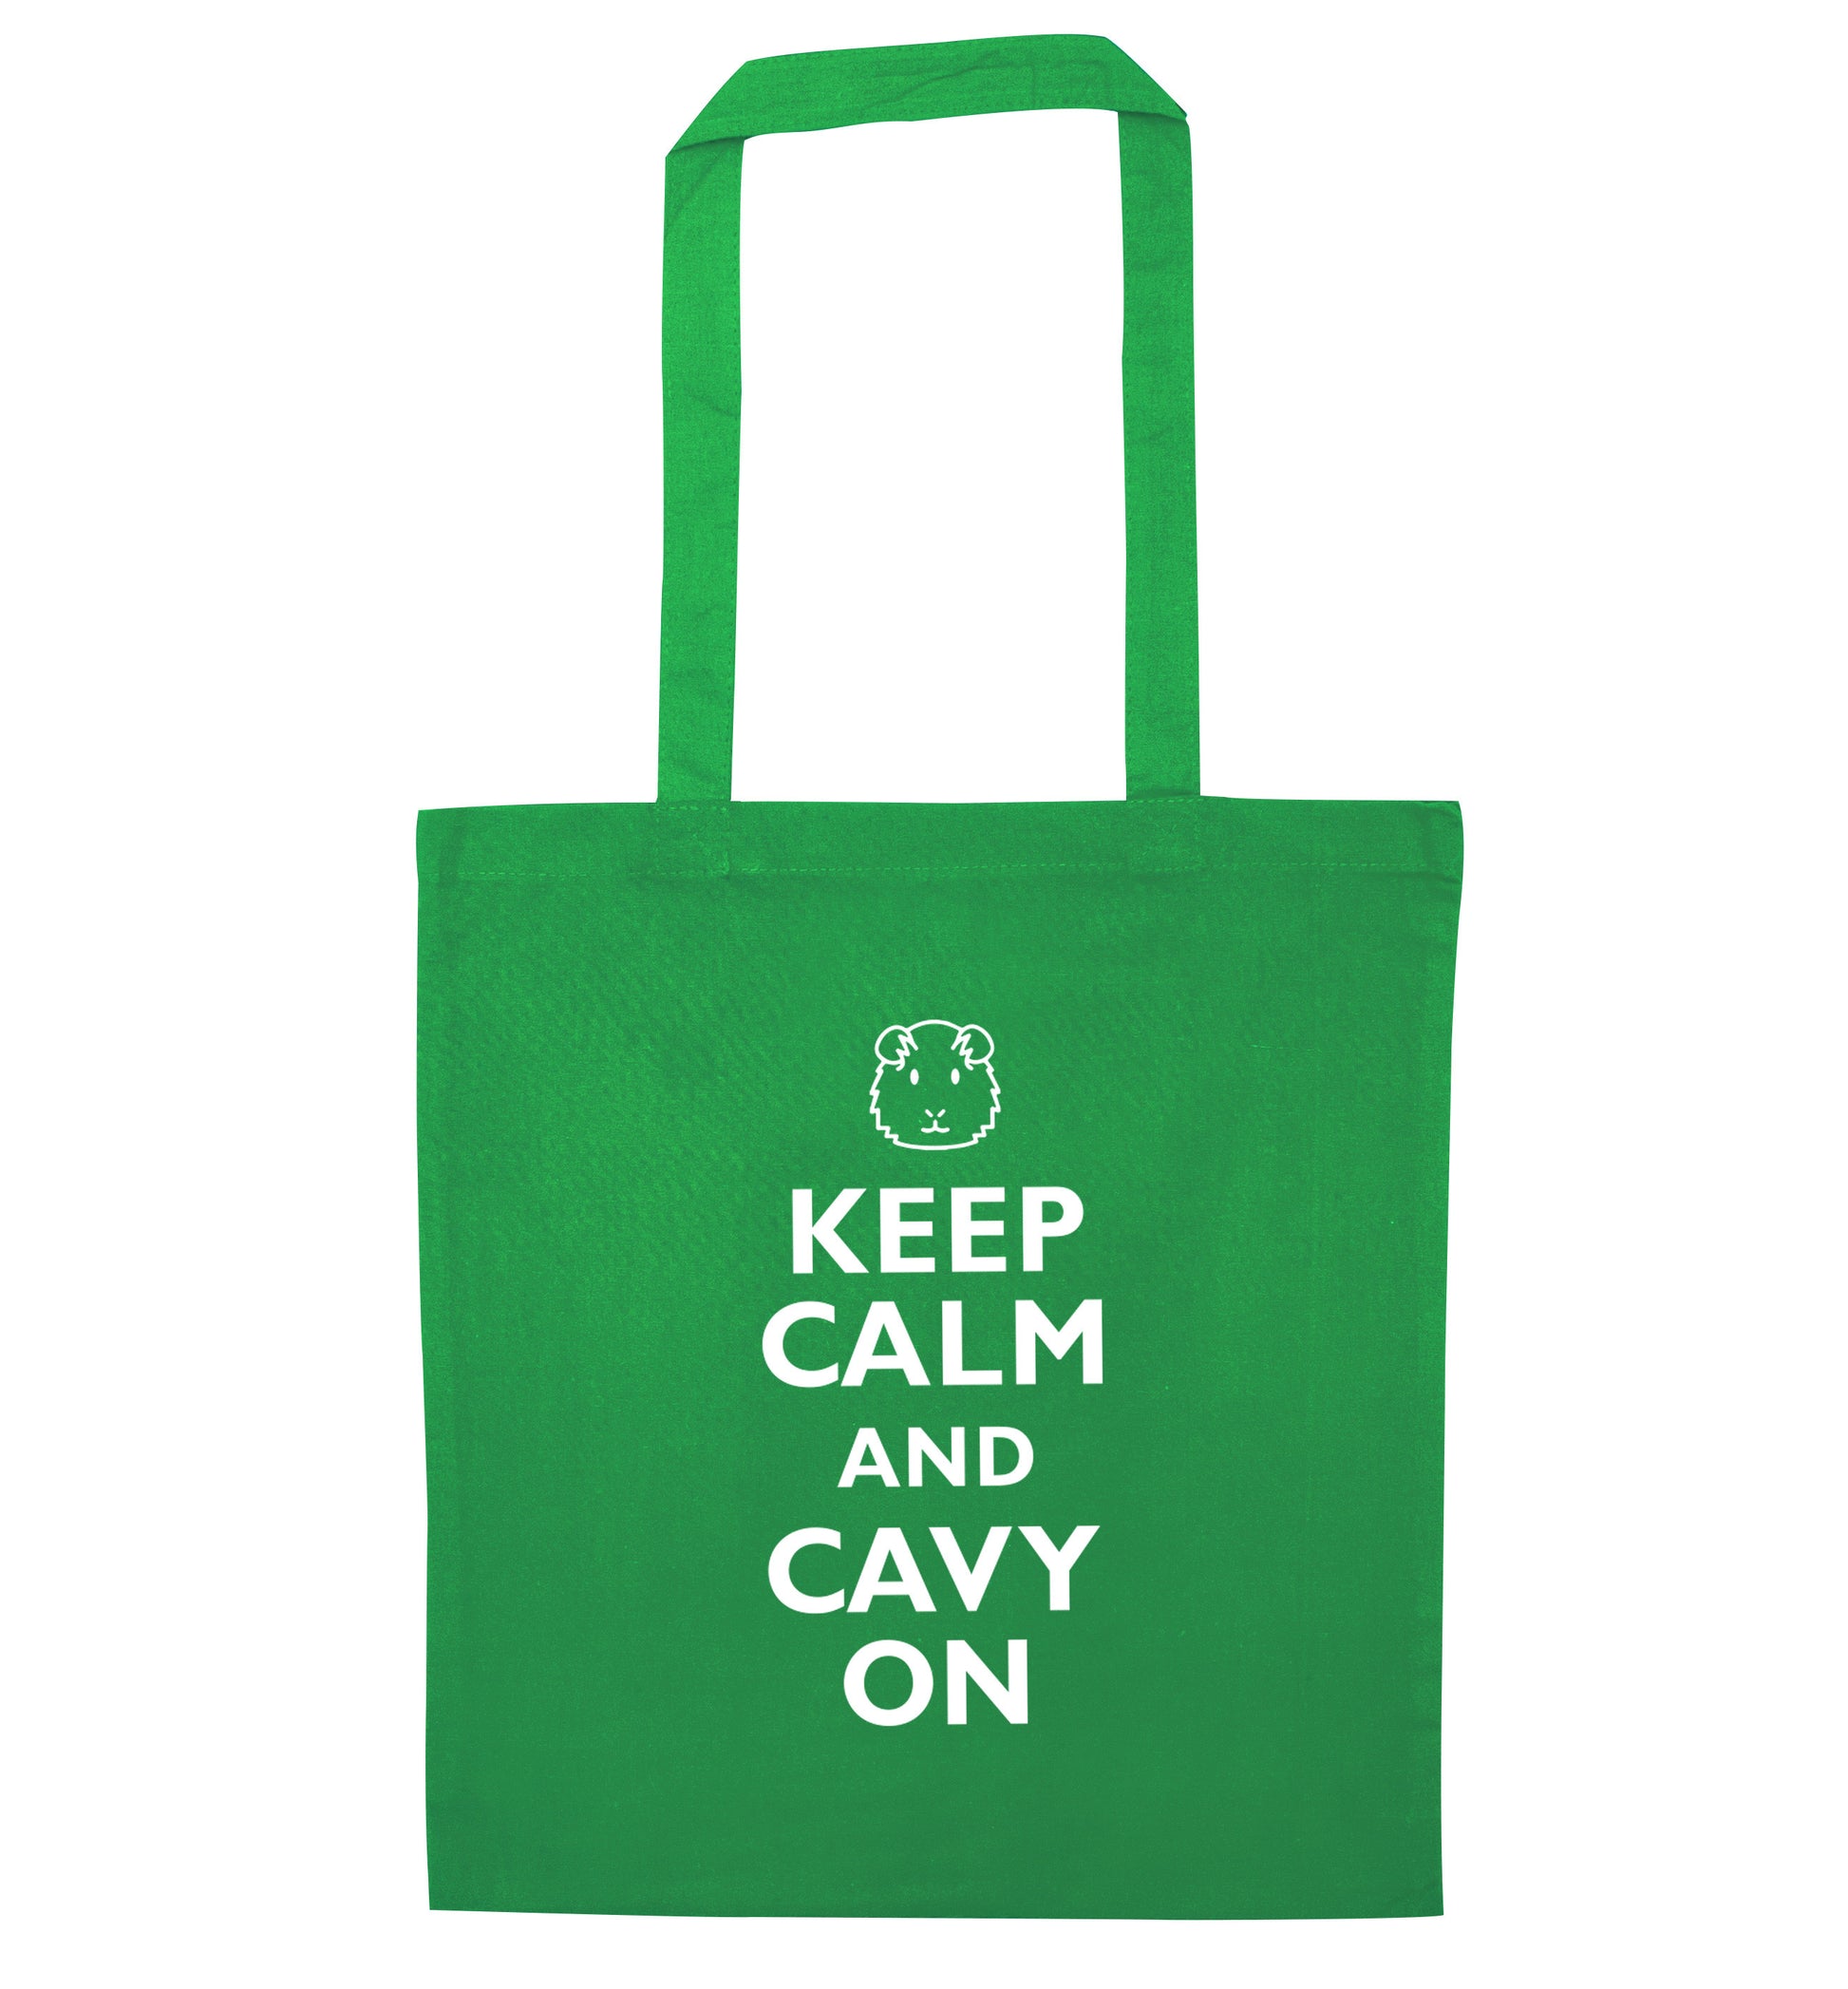 Keep calm and cavvy on green tote bag